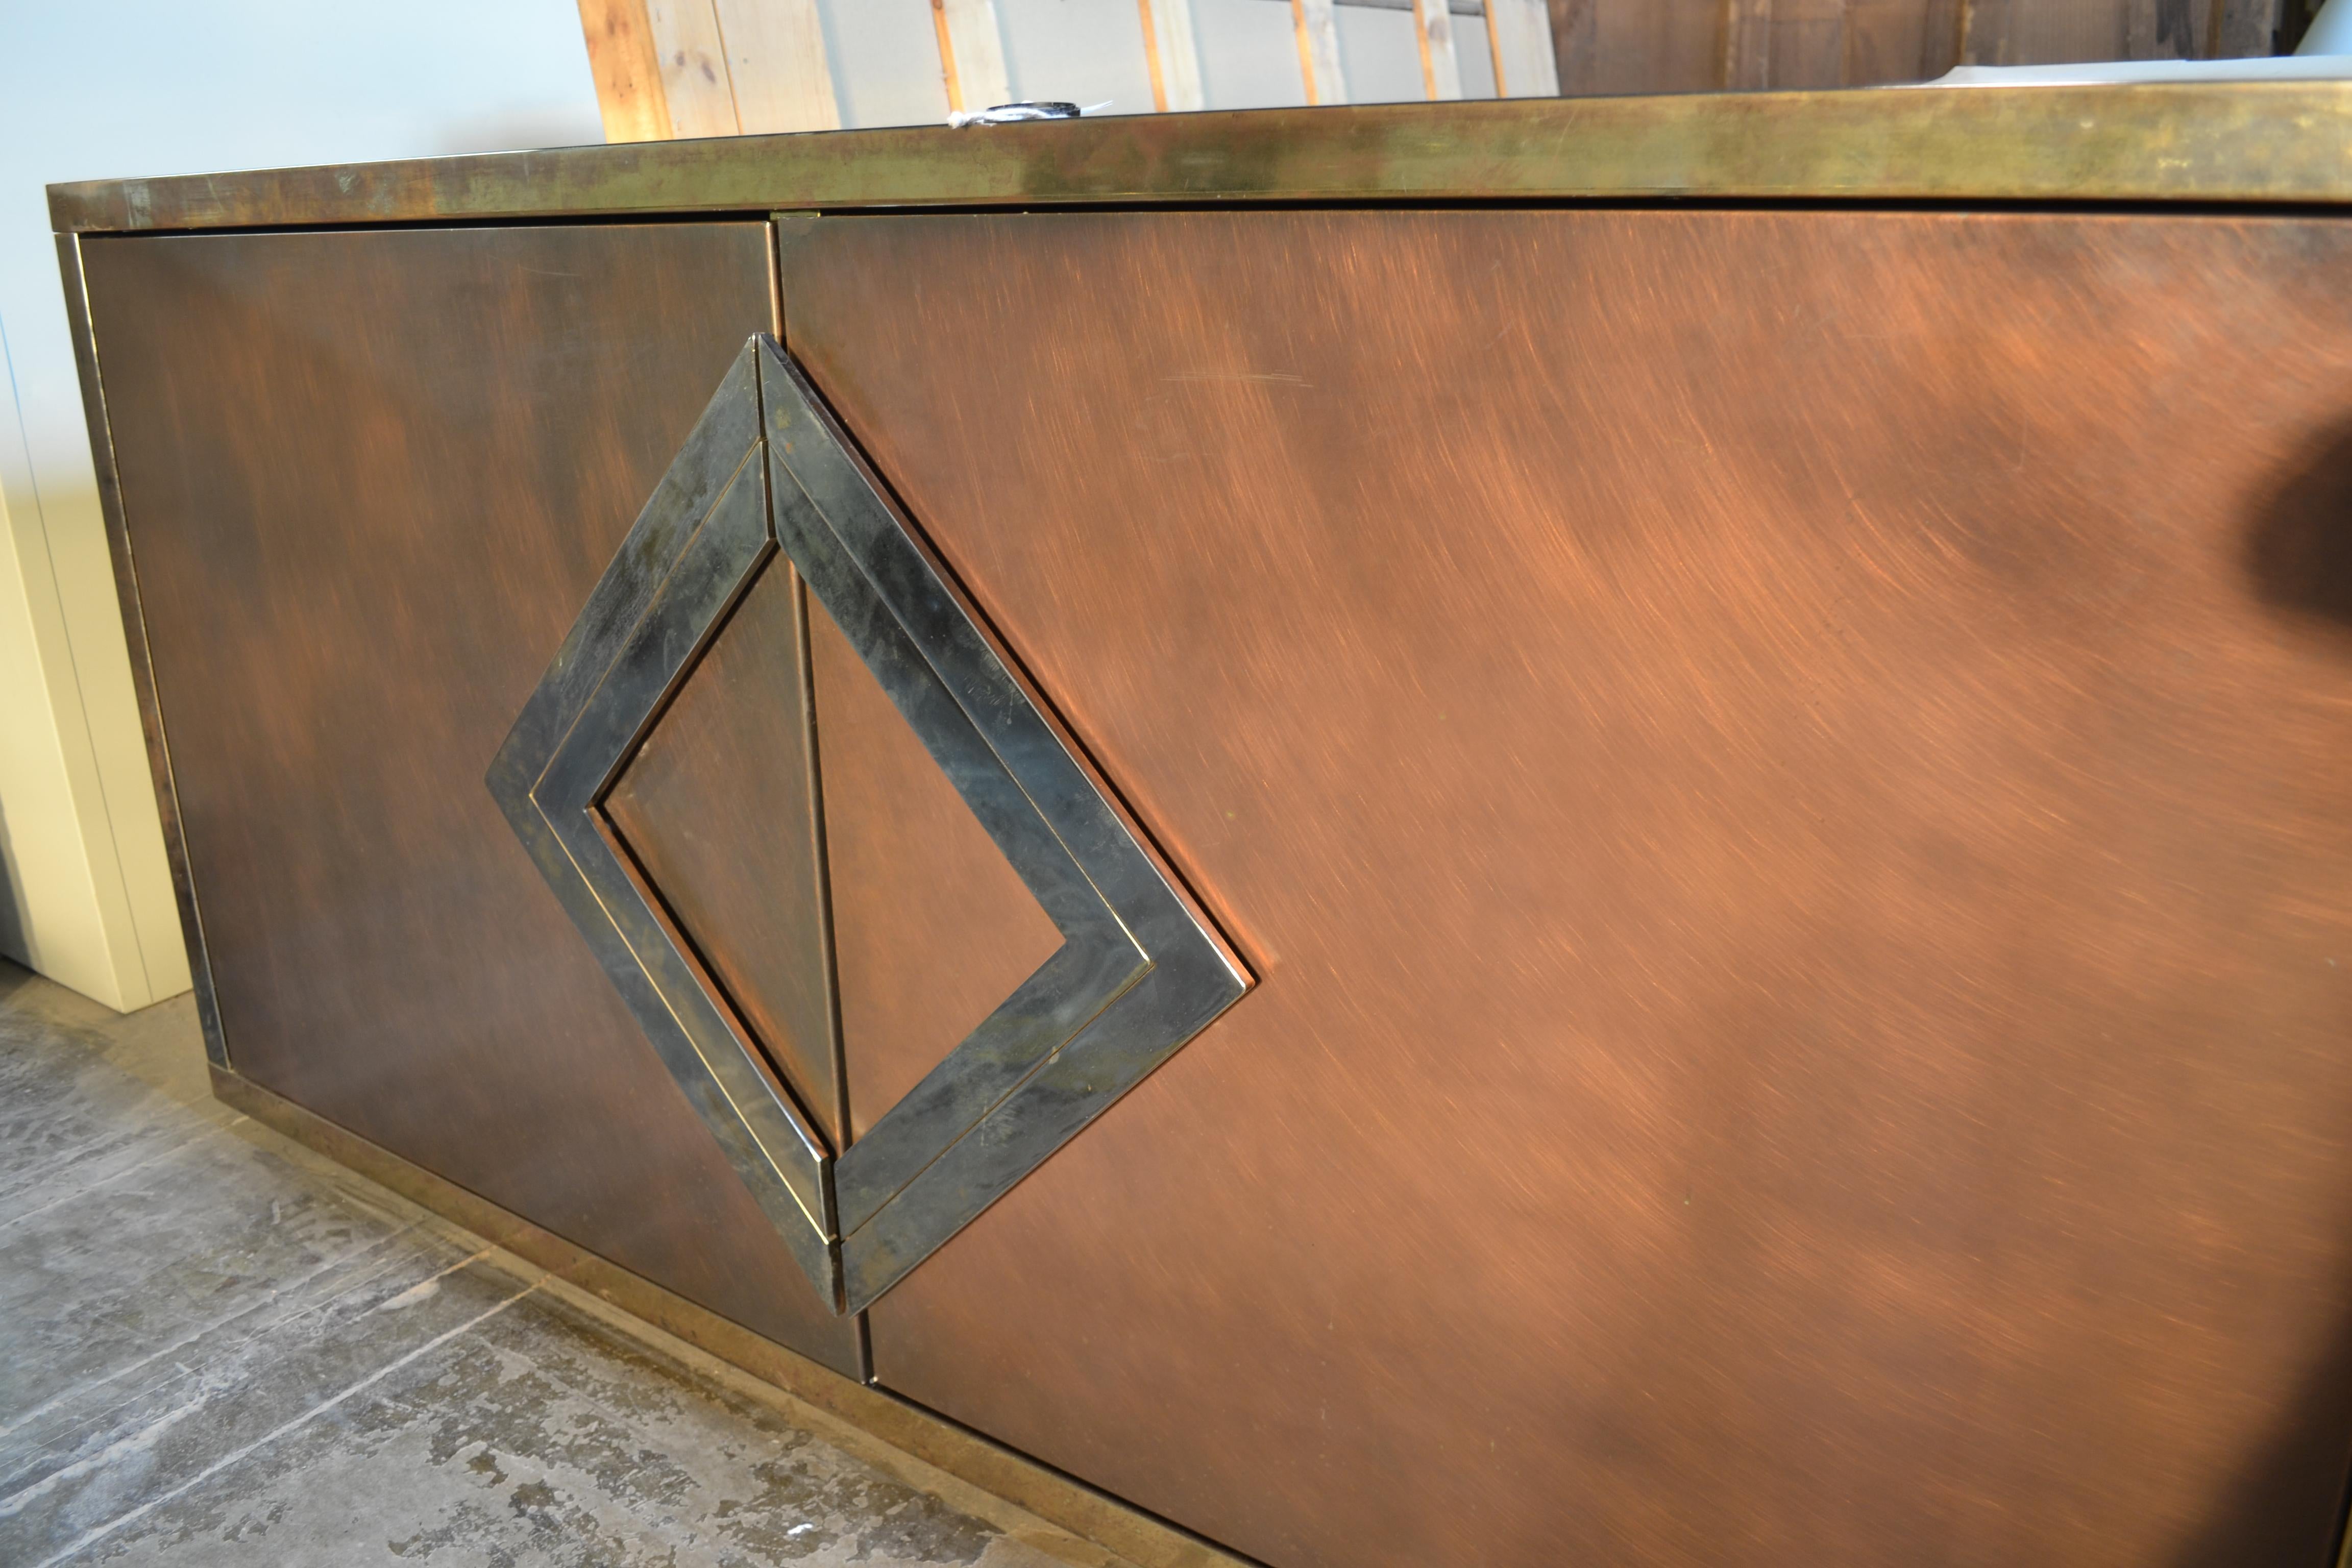 This piece has a superbly worn finish. It has a body of textured copper banded in chrome and highlighted with boldly geometric door pulls. There are two cabinet areas, each with a glass shelf. It's in good condition with some scuffing to the metal